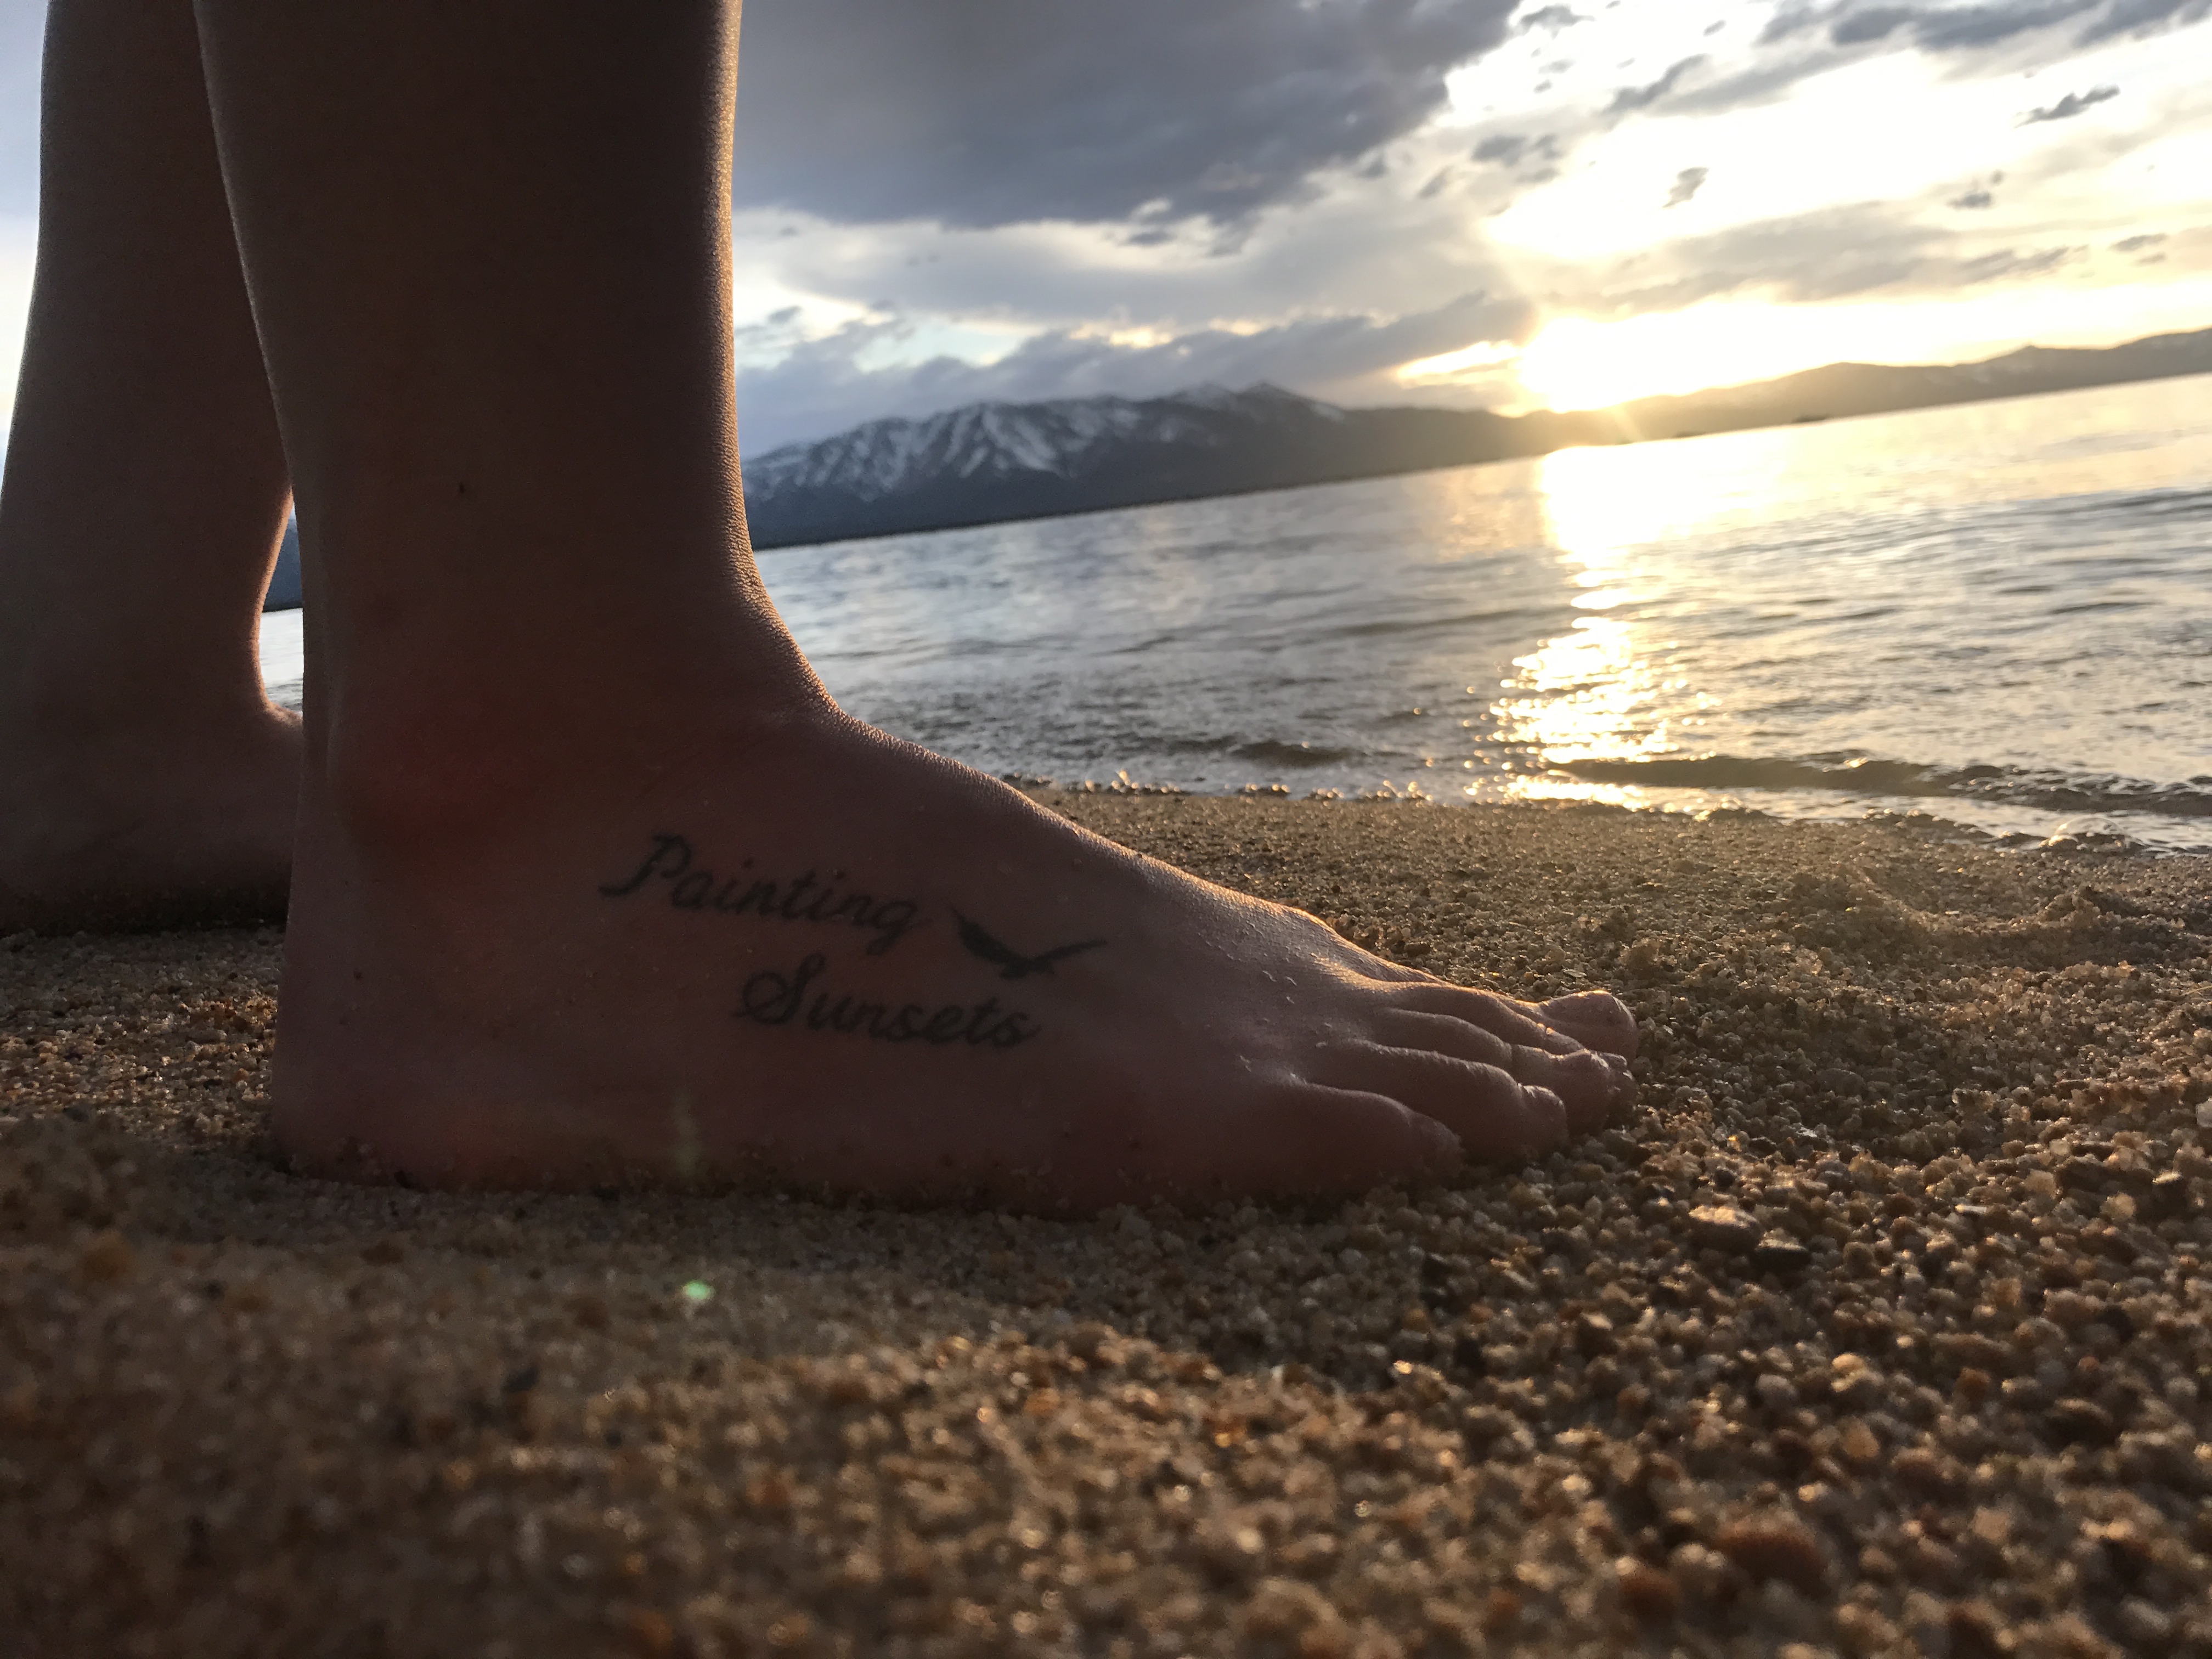 Tattoo "Painting Sunsets" in memory of my mom.